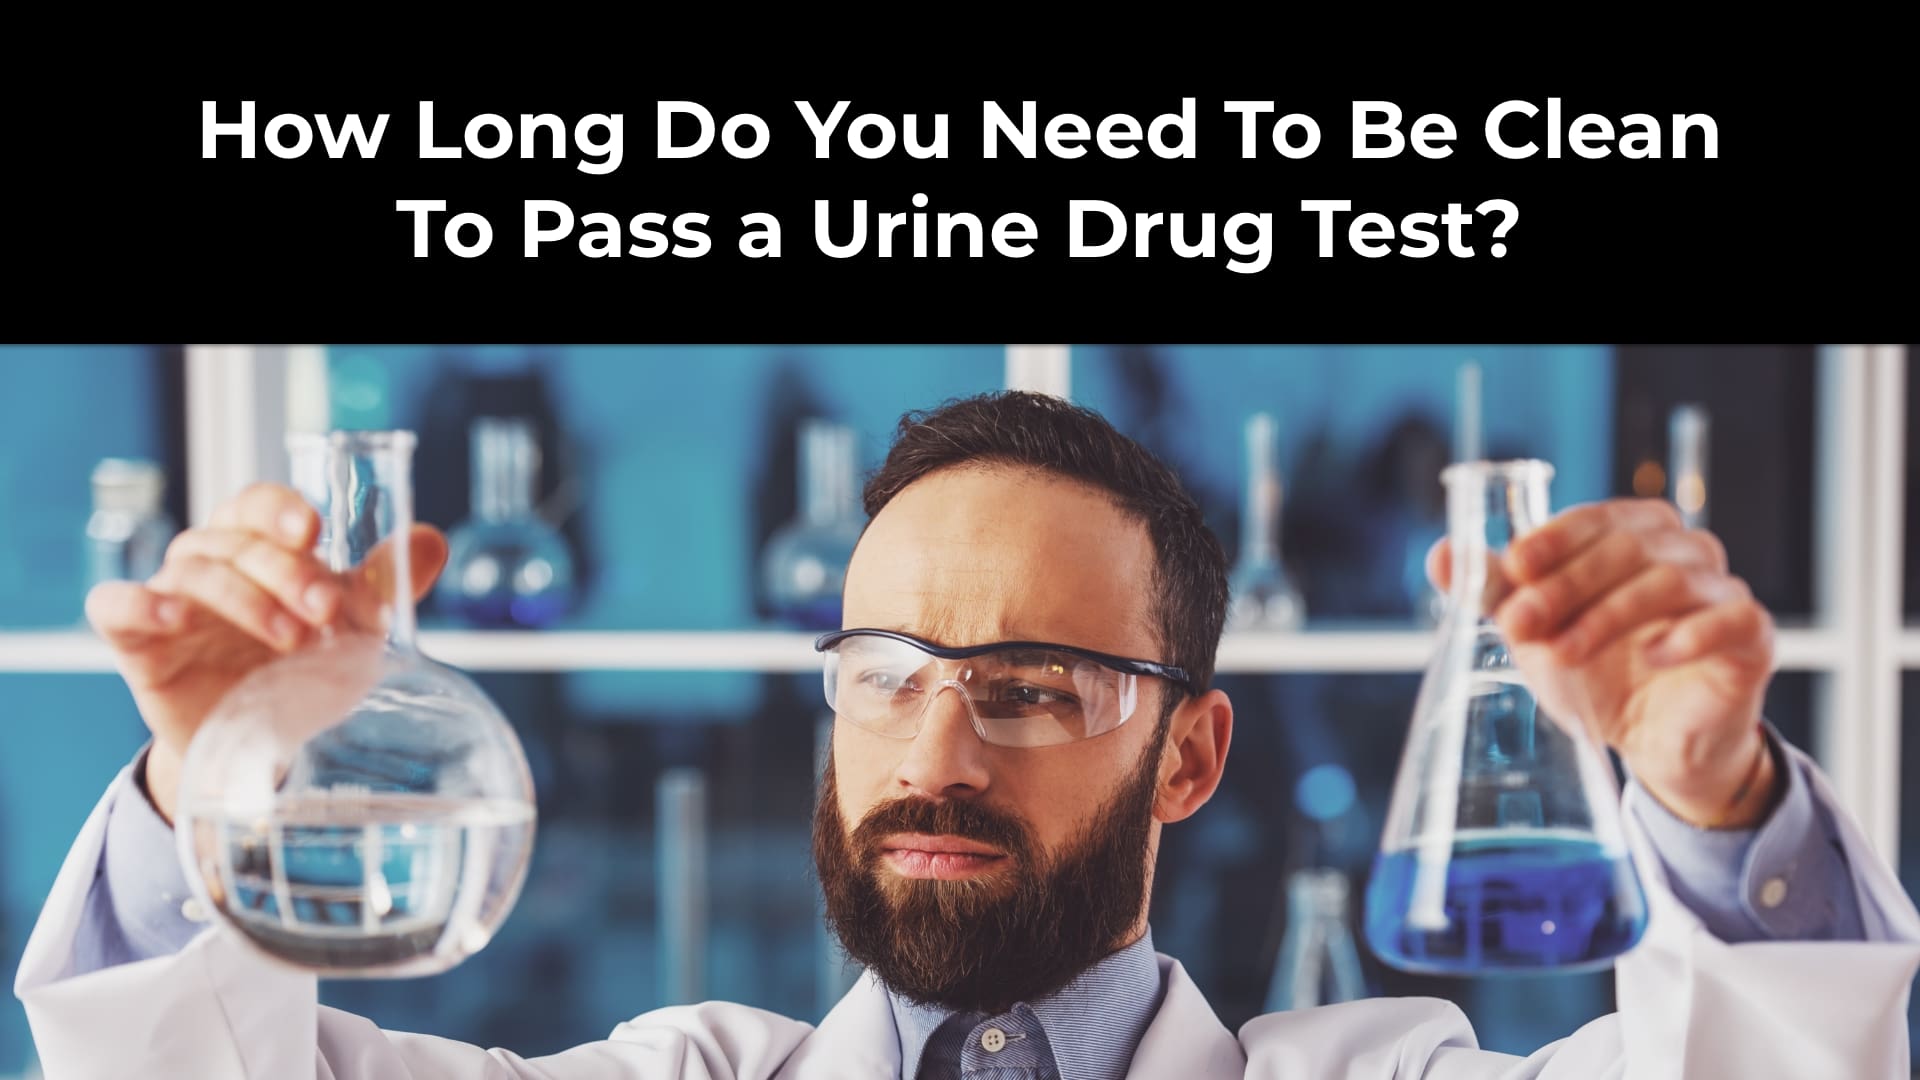 How Long Do You Need To Be Clean To Pass a Urine Drug Test